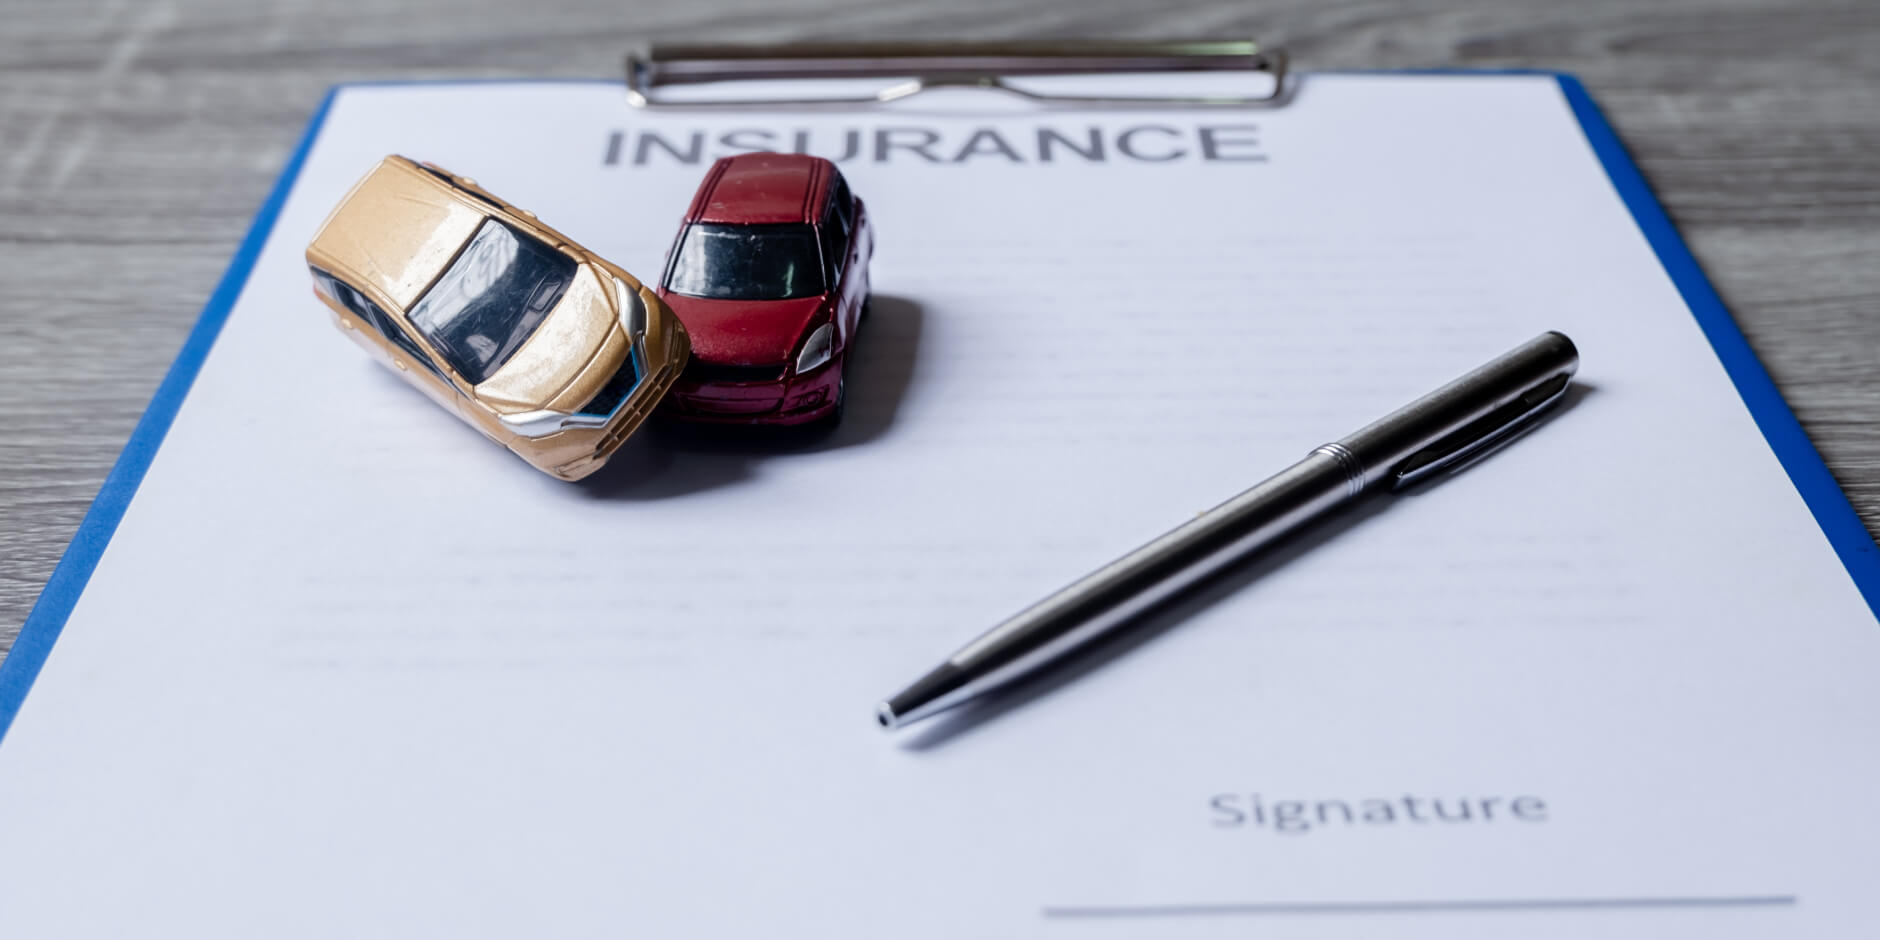 Car Insurance Myths Debunked: What Really Affects Your Premium?